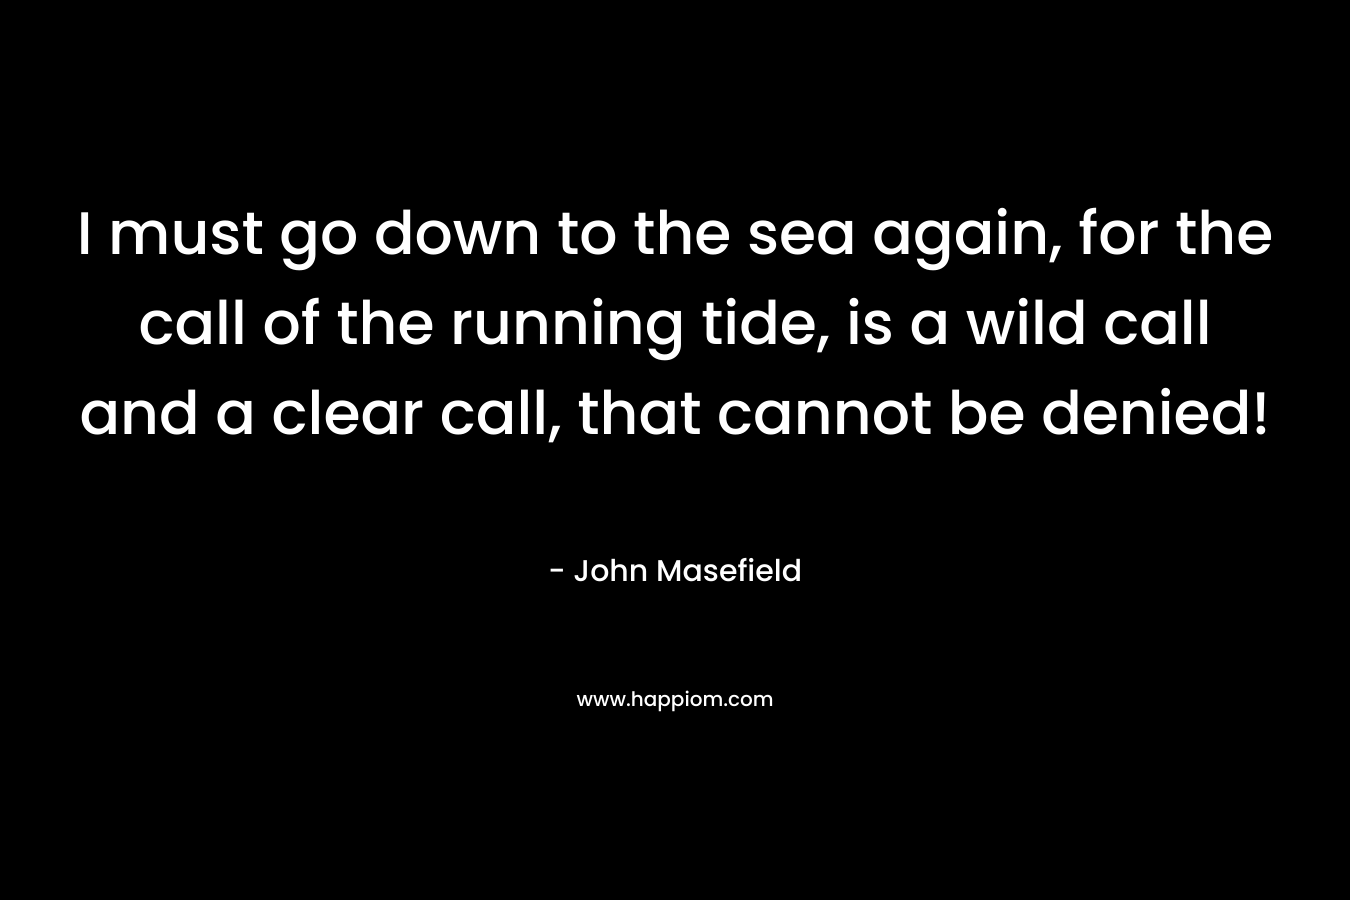 I must go down to the sea again, for the call of the running tide, is a wild call and a clear call, that cannot be denied!